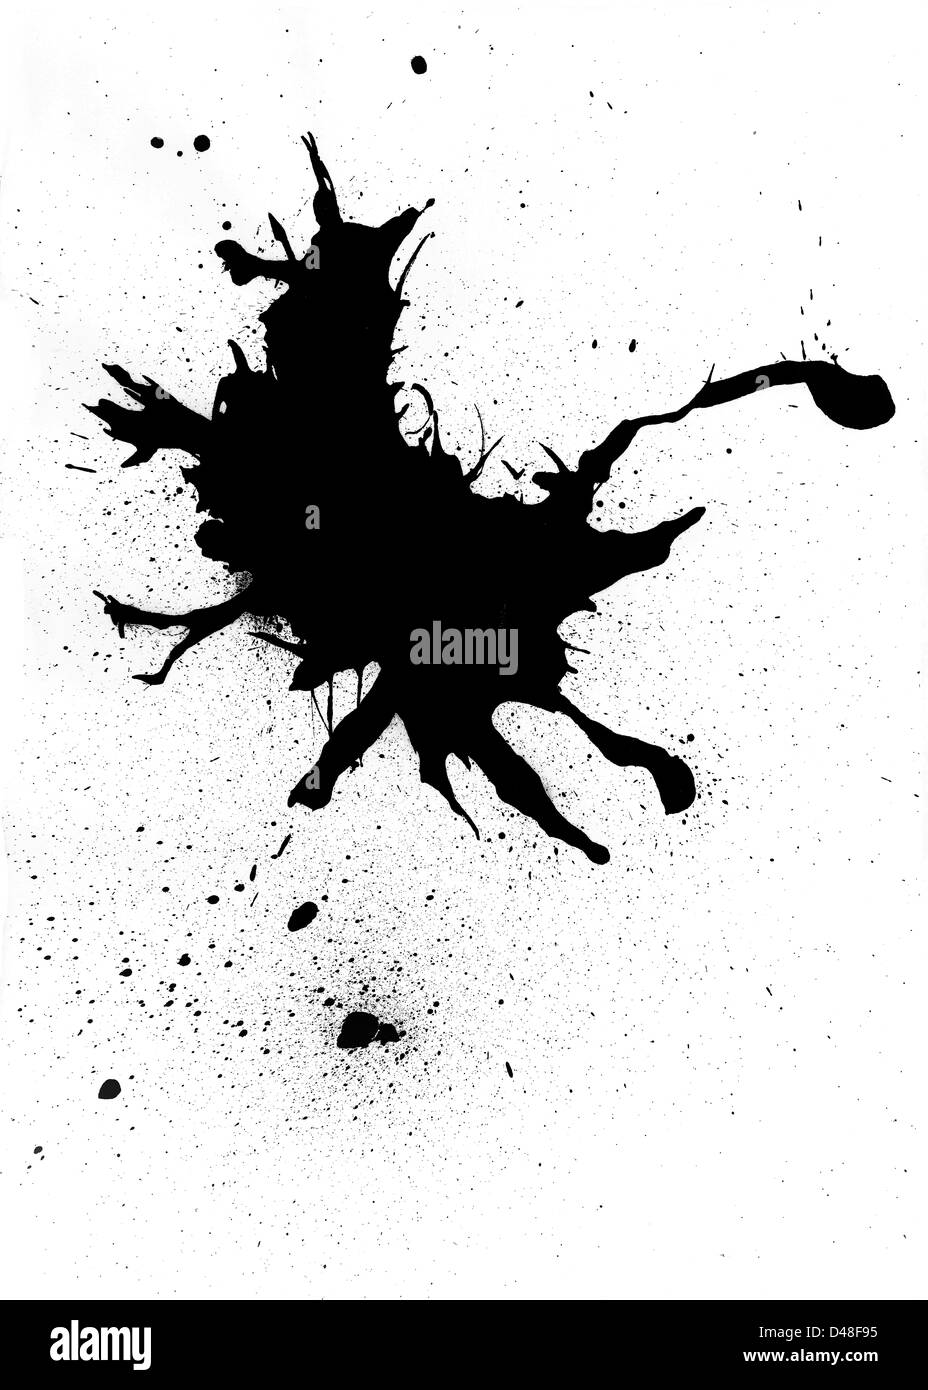 Black ink blob abstract design with splatter Stock Photo